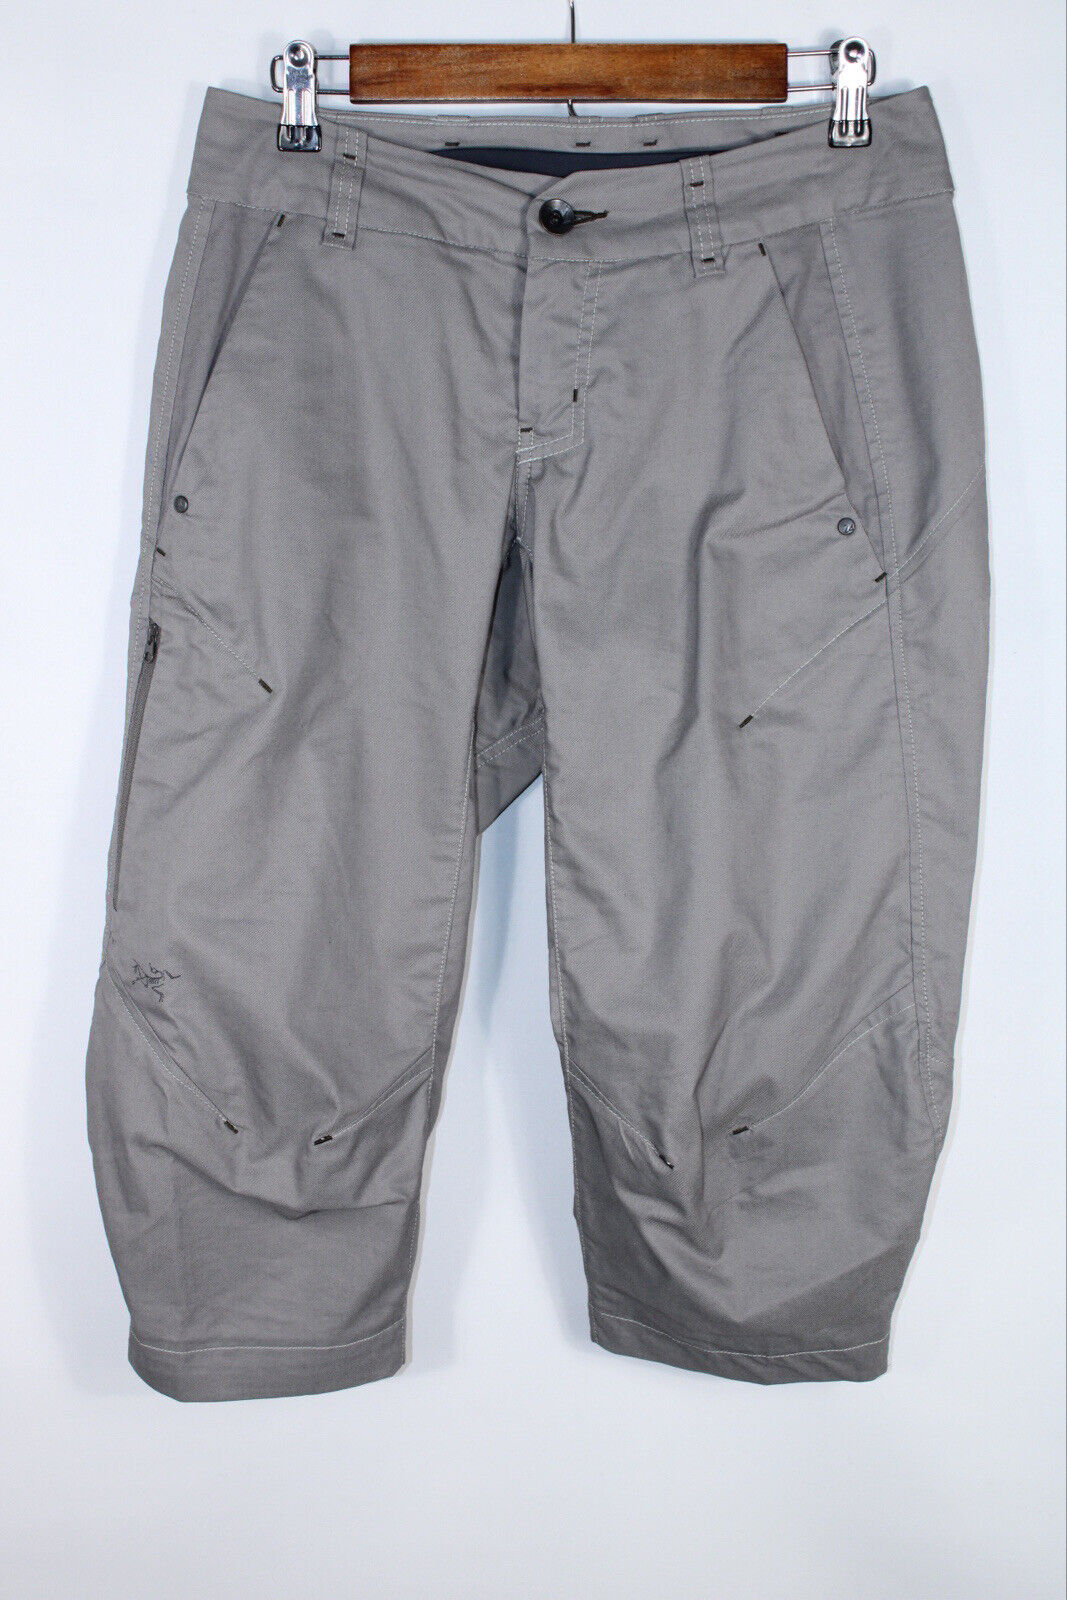 Arc’teryx Women’s Size 4 Color Gray Max 89% OFF Shorts Quantity limited Bermuda